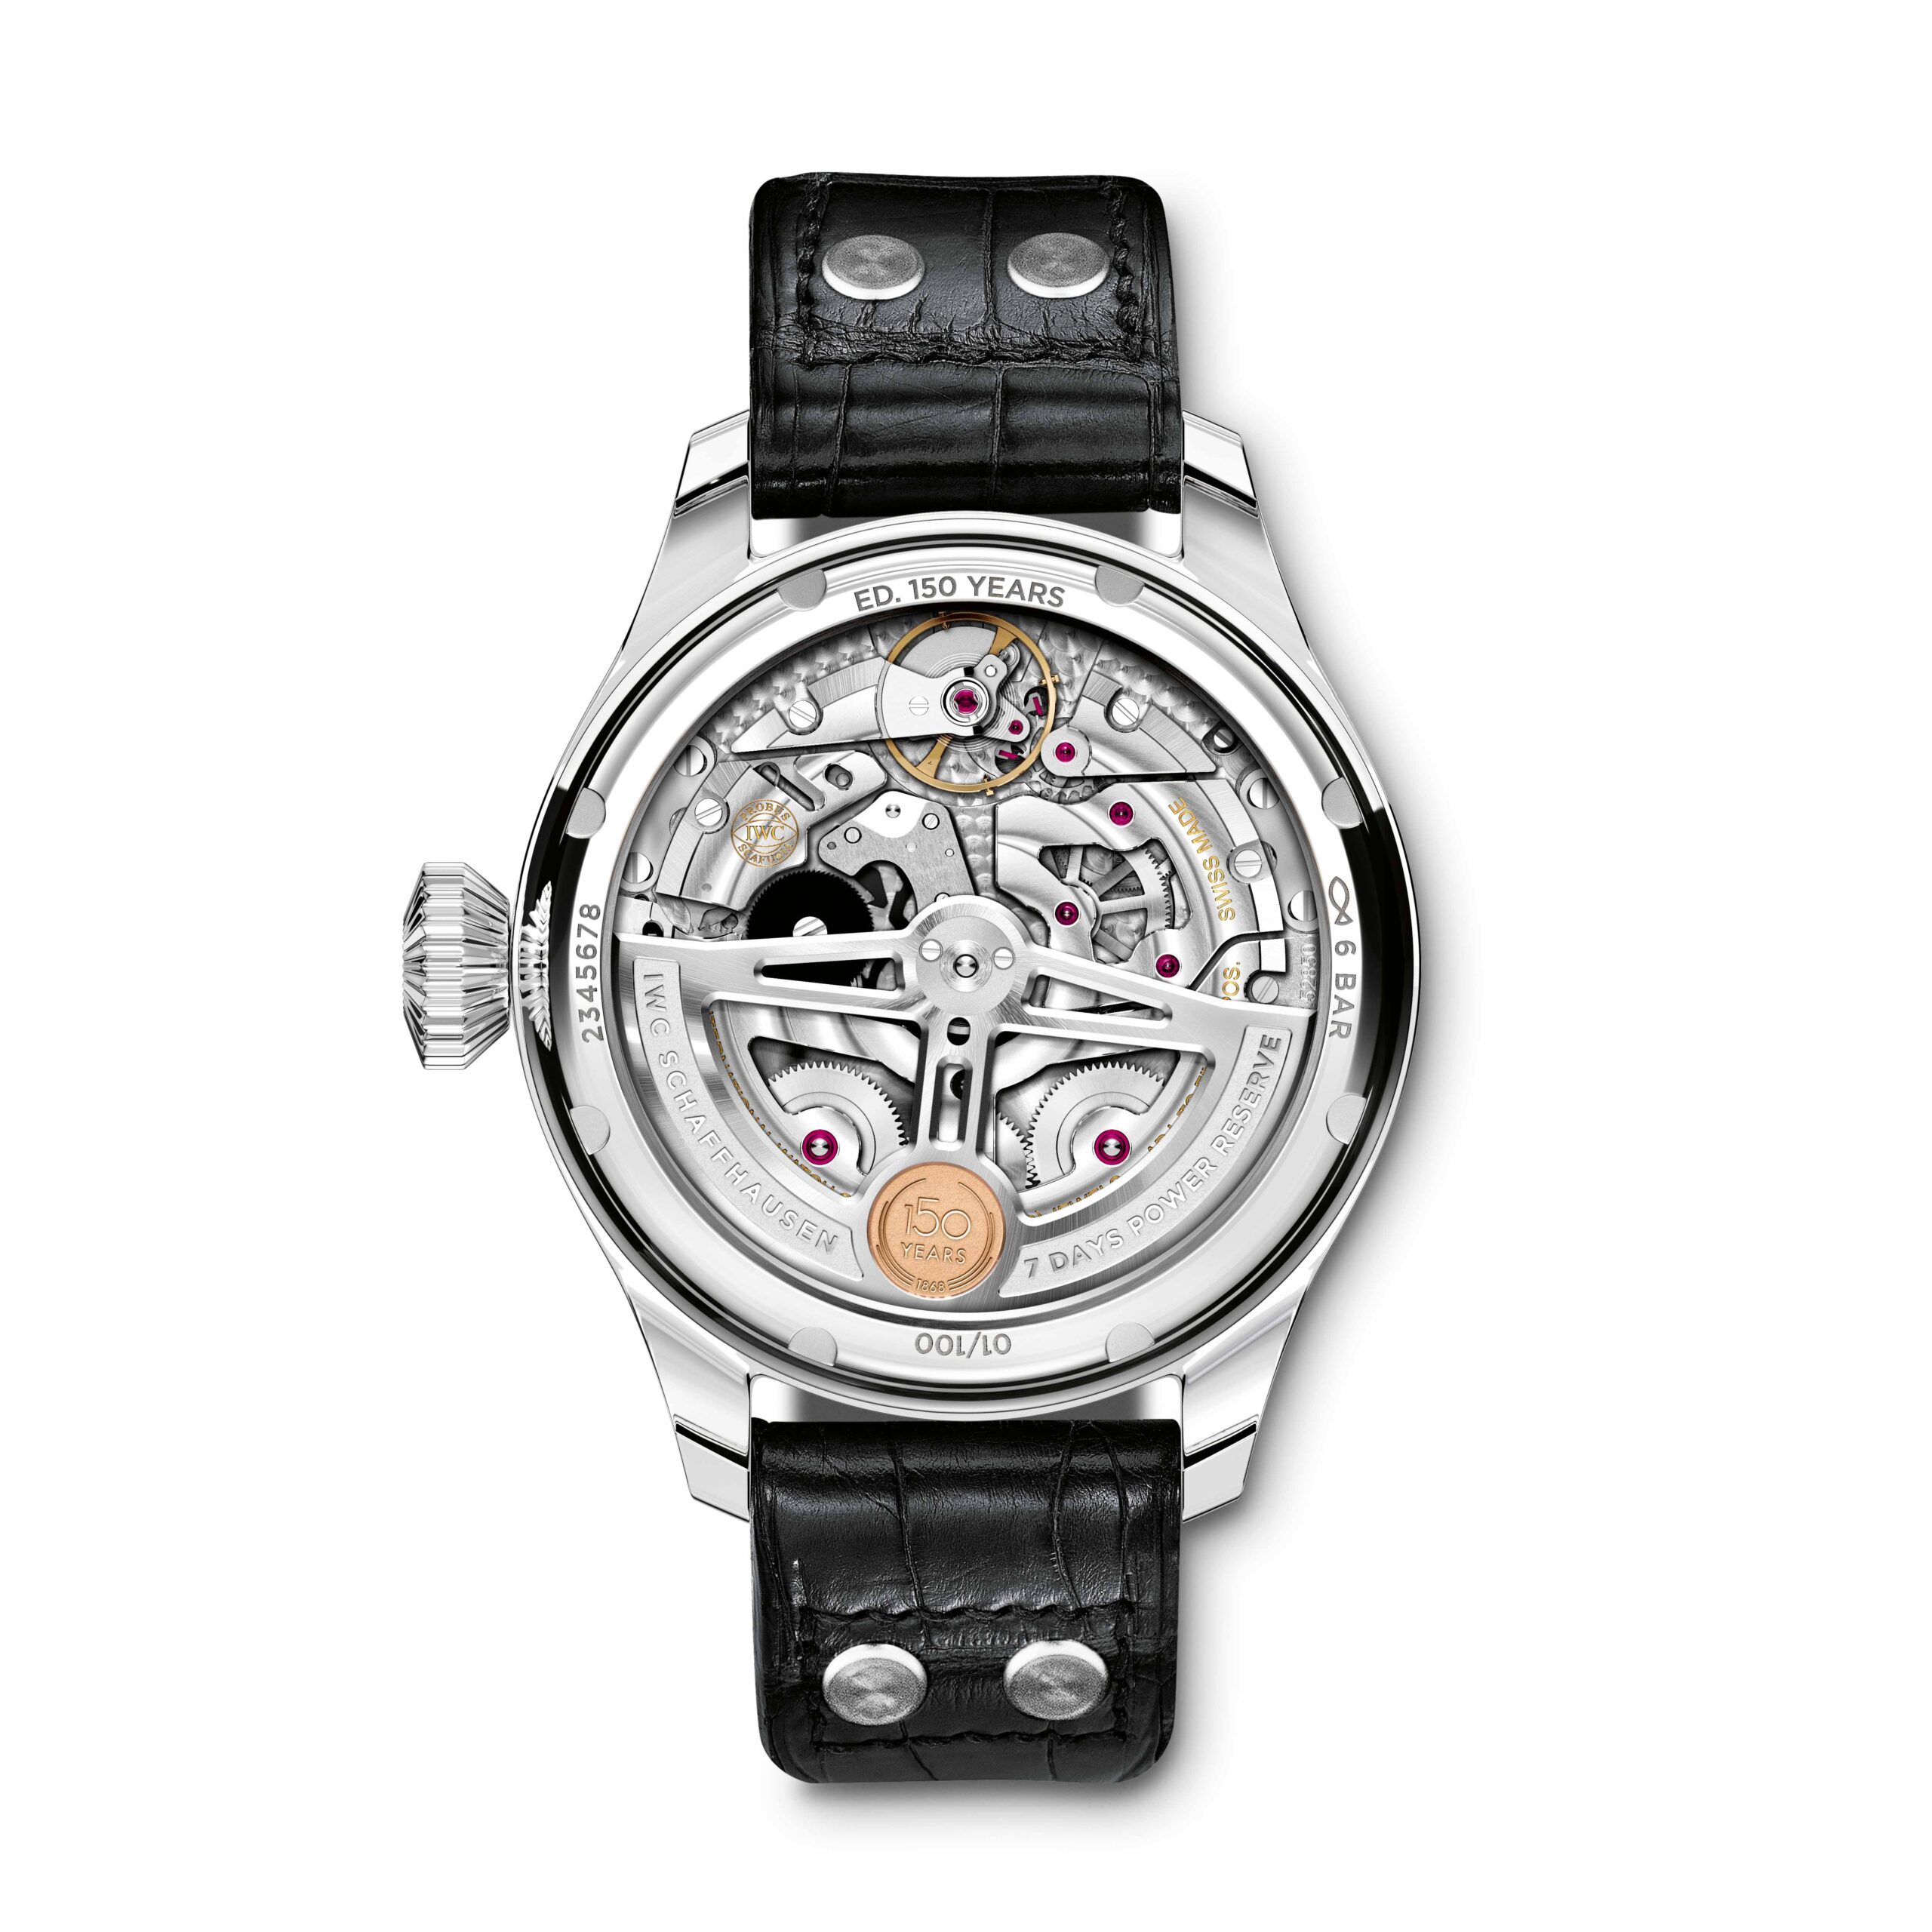 The Pellaton winding of the IWC-manufactured calibre 52850 comes with wear-proof ceramic components and generates a 7-day power reserve in two barrels. 